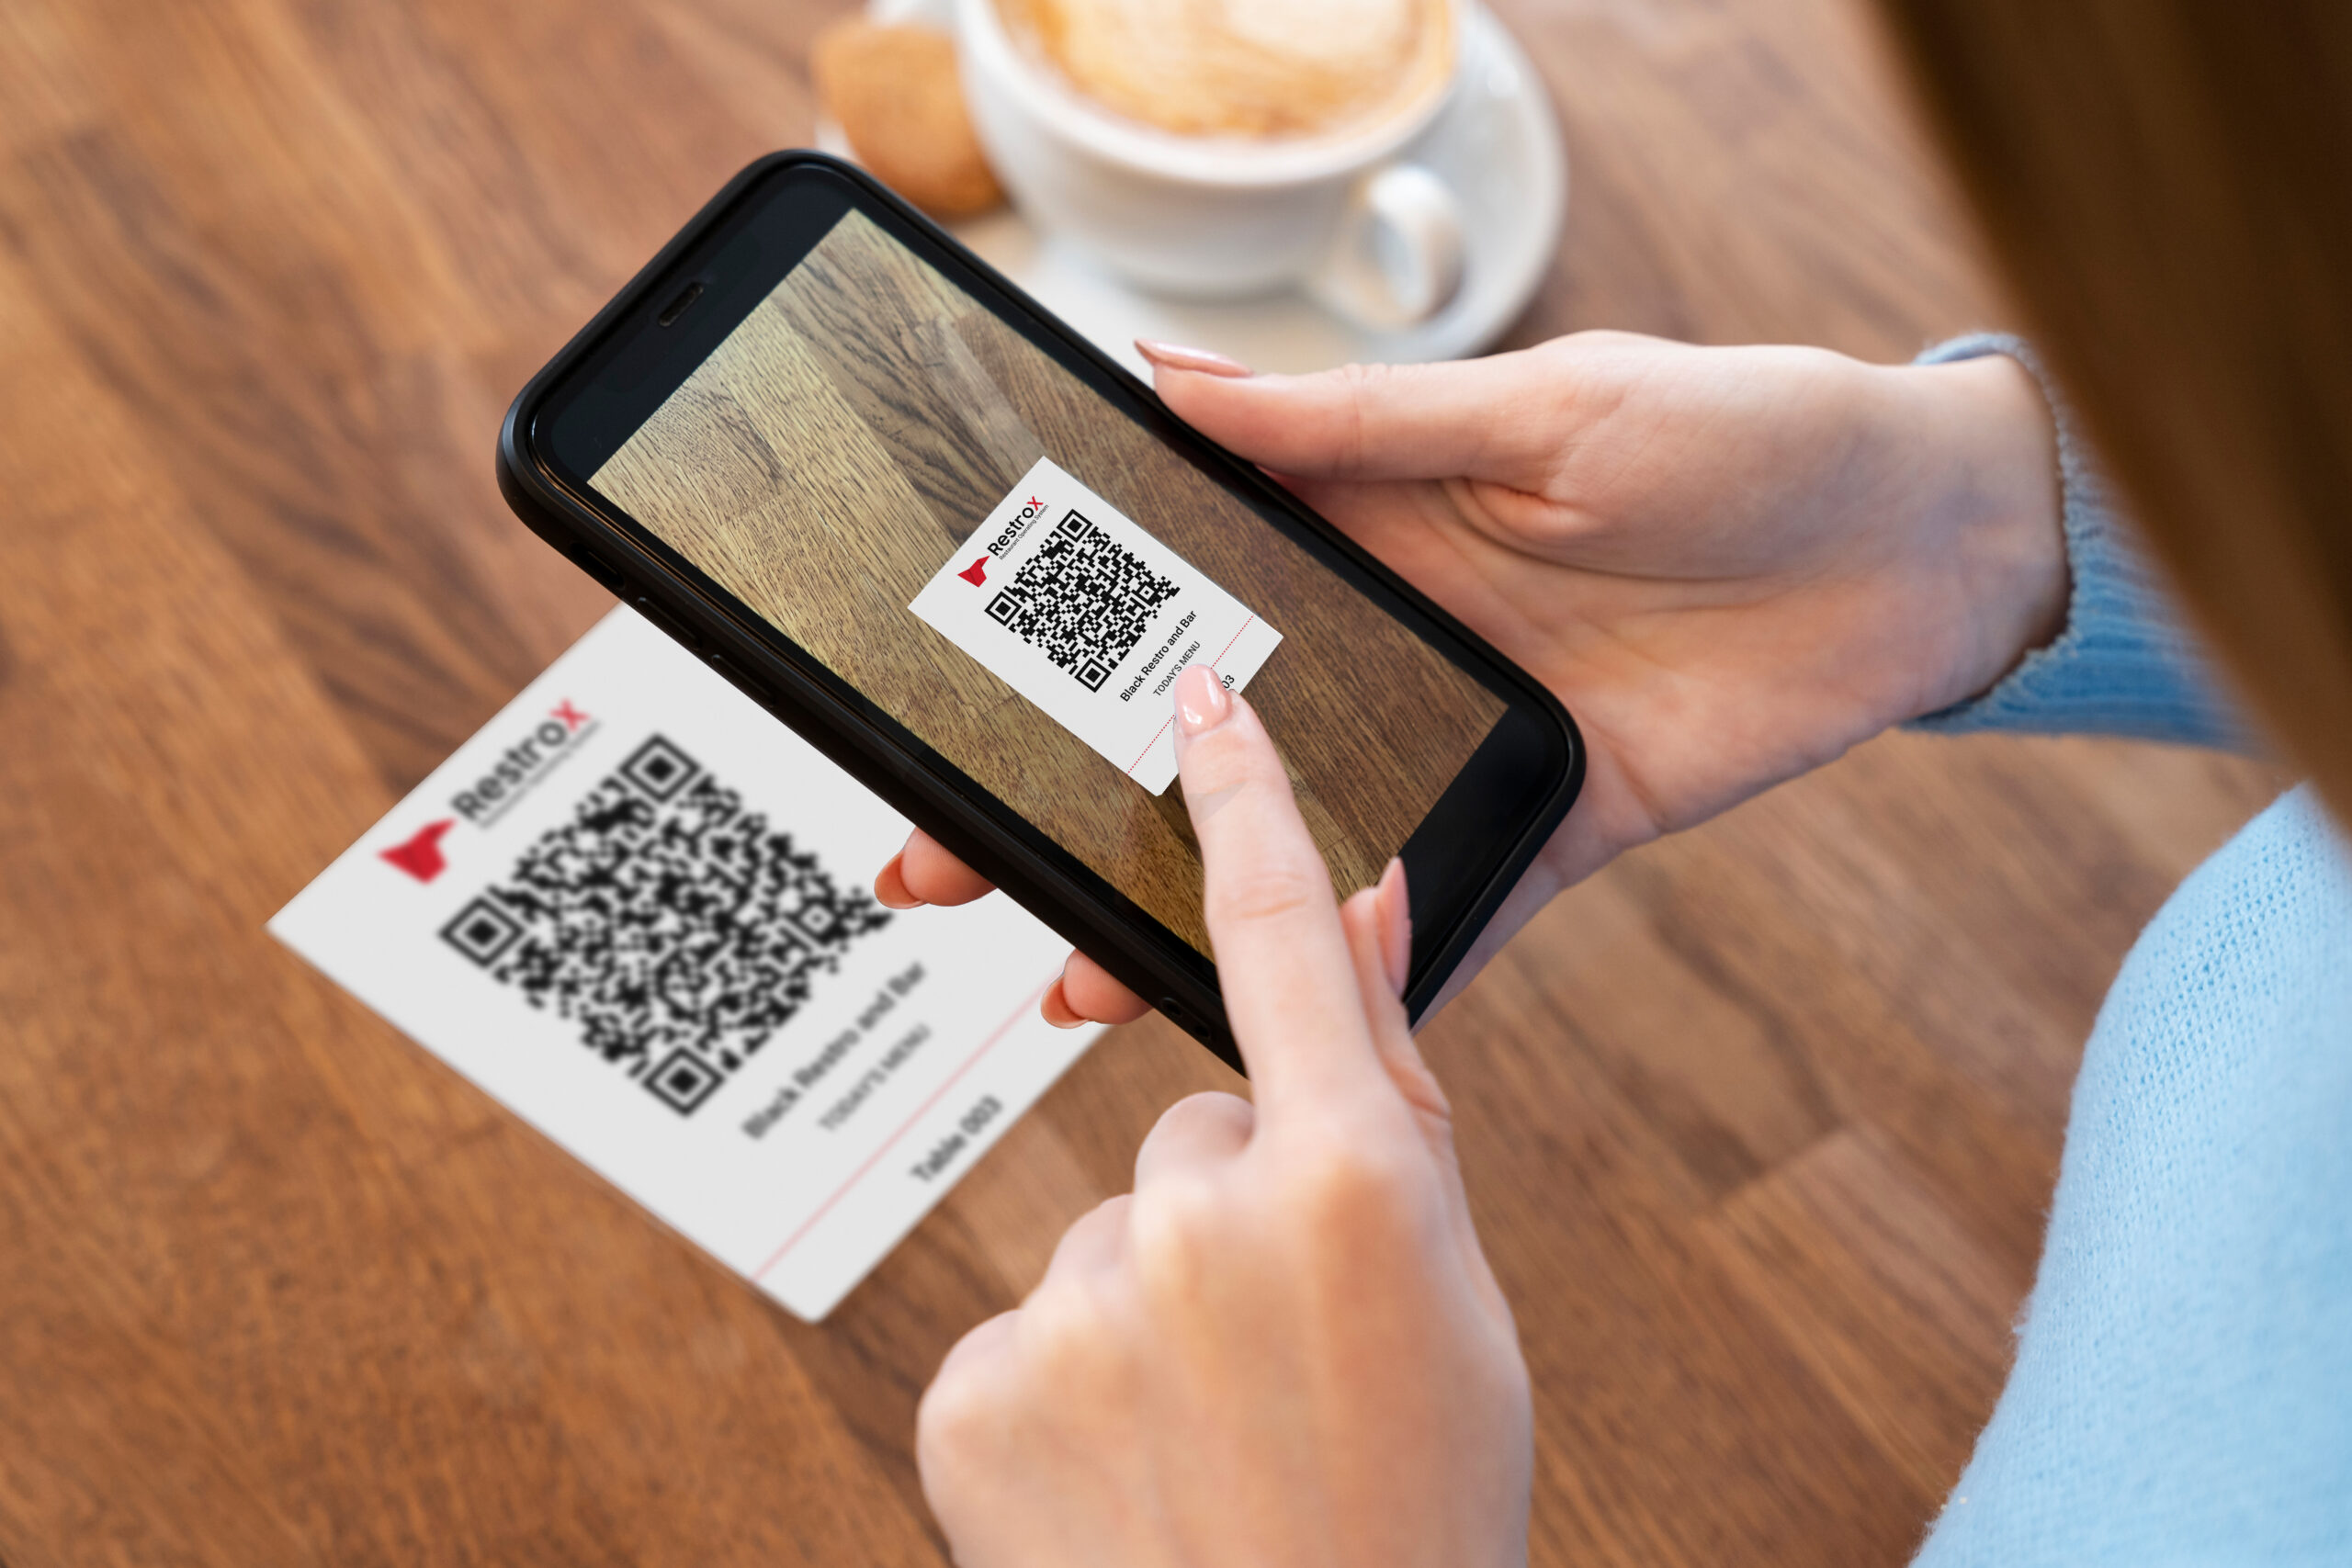 RestroX in the restaurant industry with QR codes.